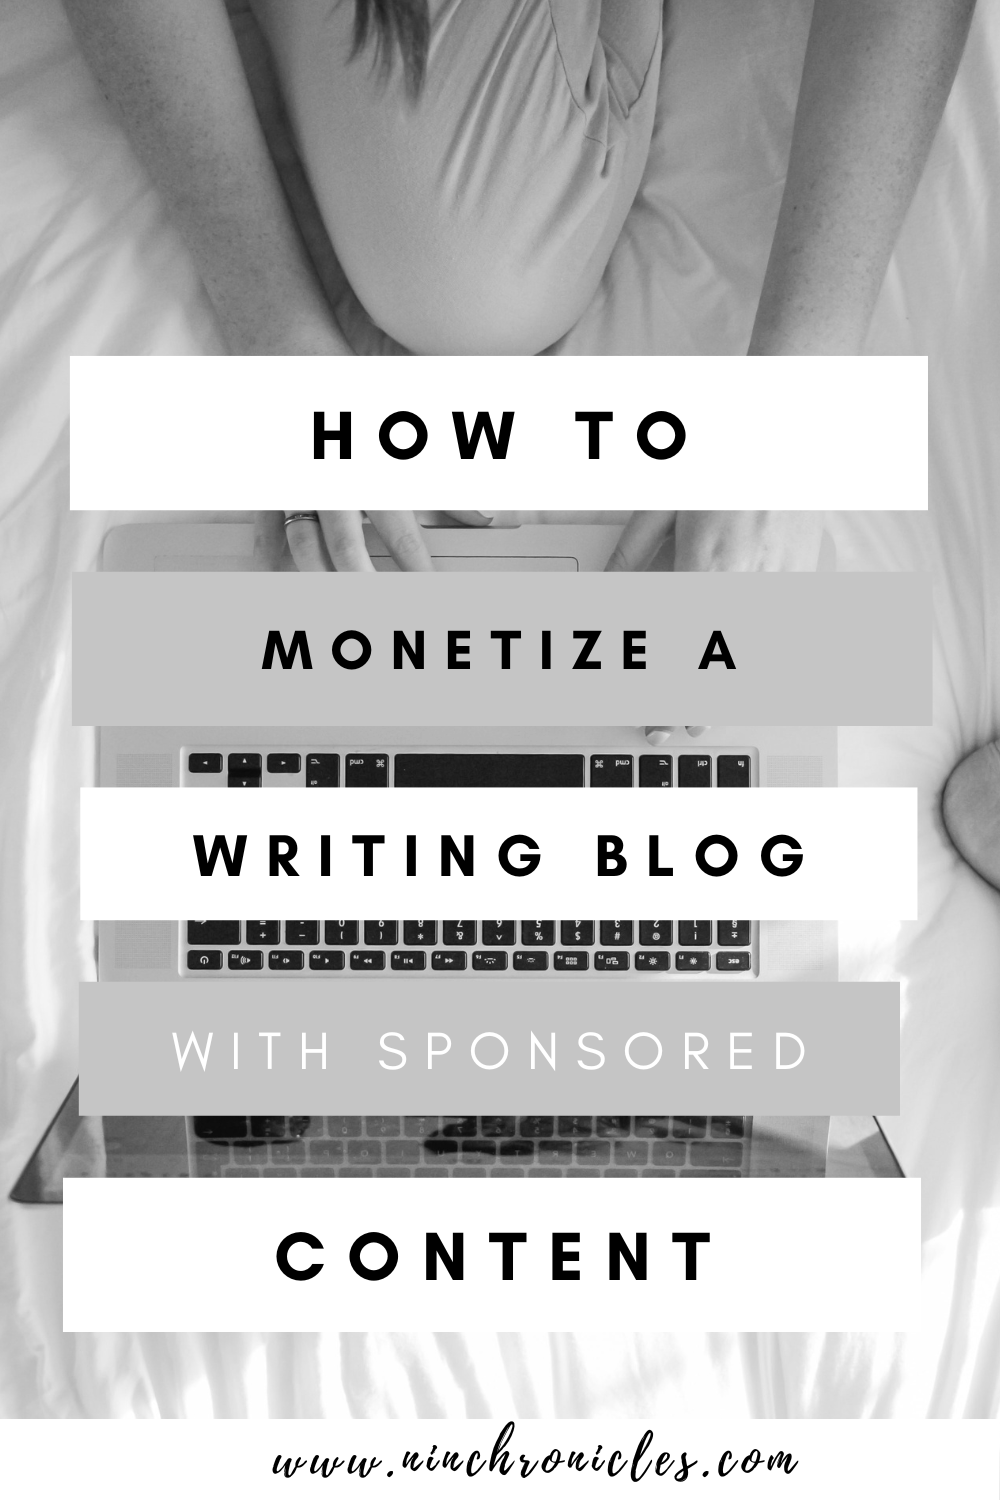 How to Monetize a Writing Blog with Sponsored Content